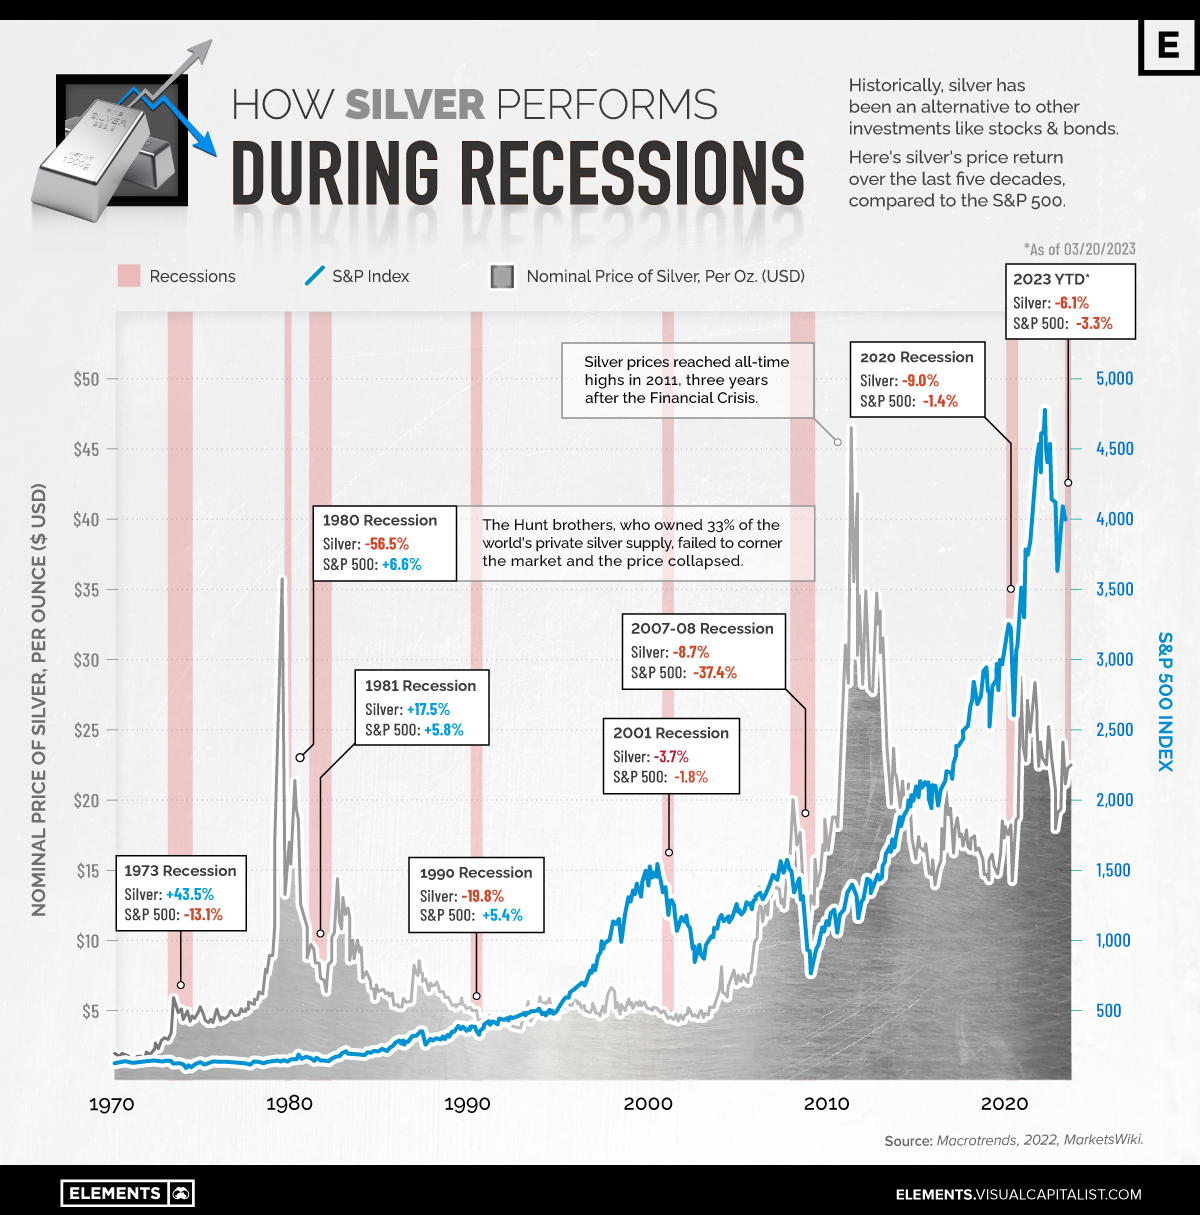 Silver vs. Stocks: Comparing Performance During Recessions